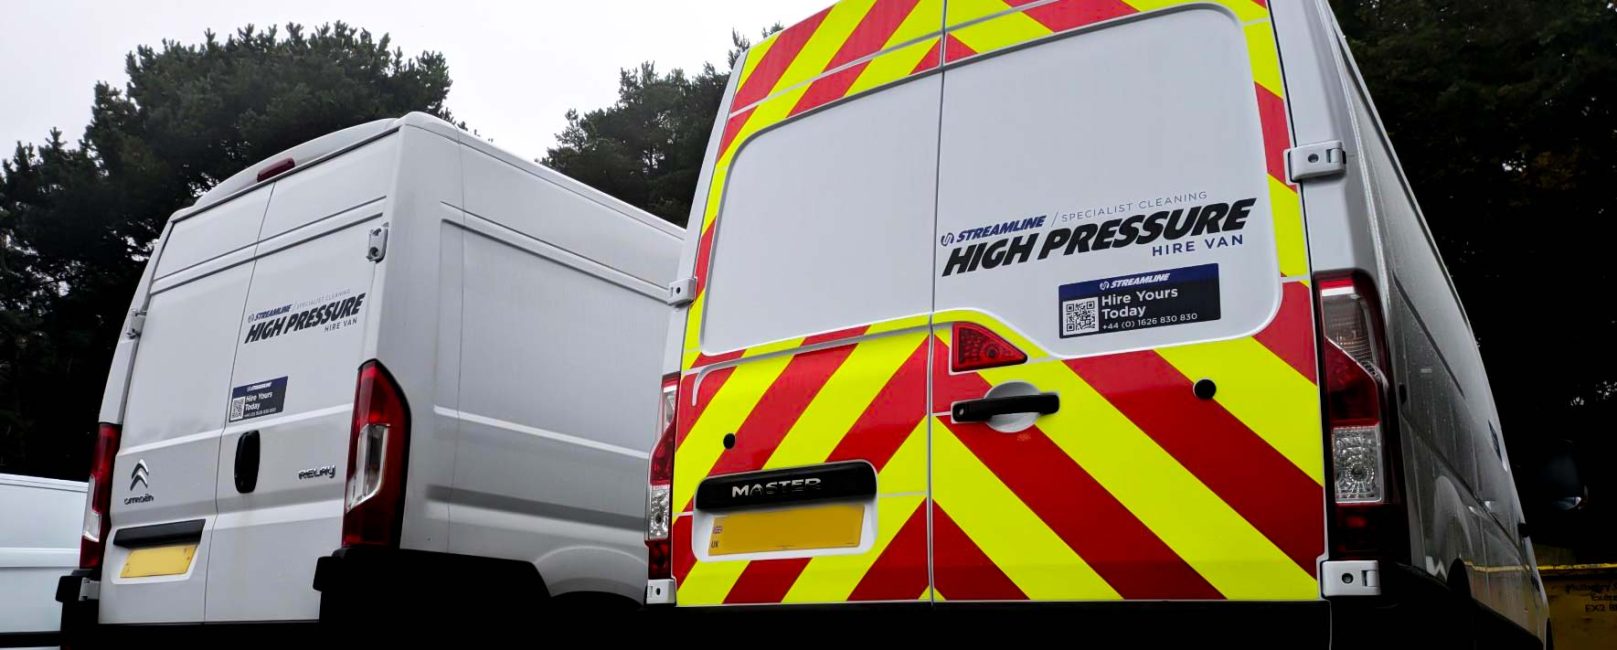 Pressure-Washing with the Pressure Off: Streamline Hire Vans banner